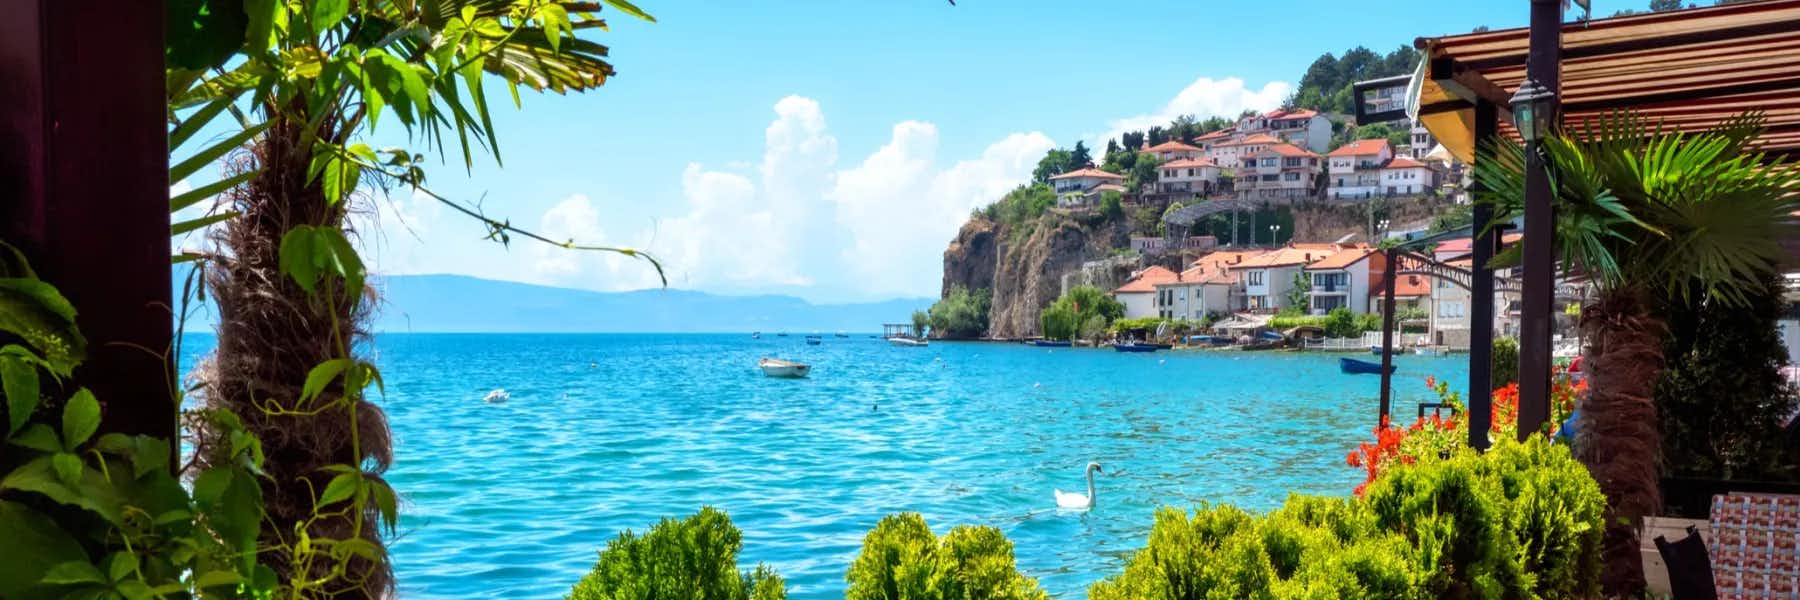 Three Months of Expat Living in Low-Cost Ohrid, North Macedonia